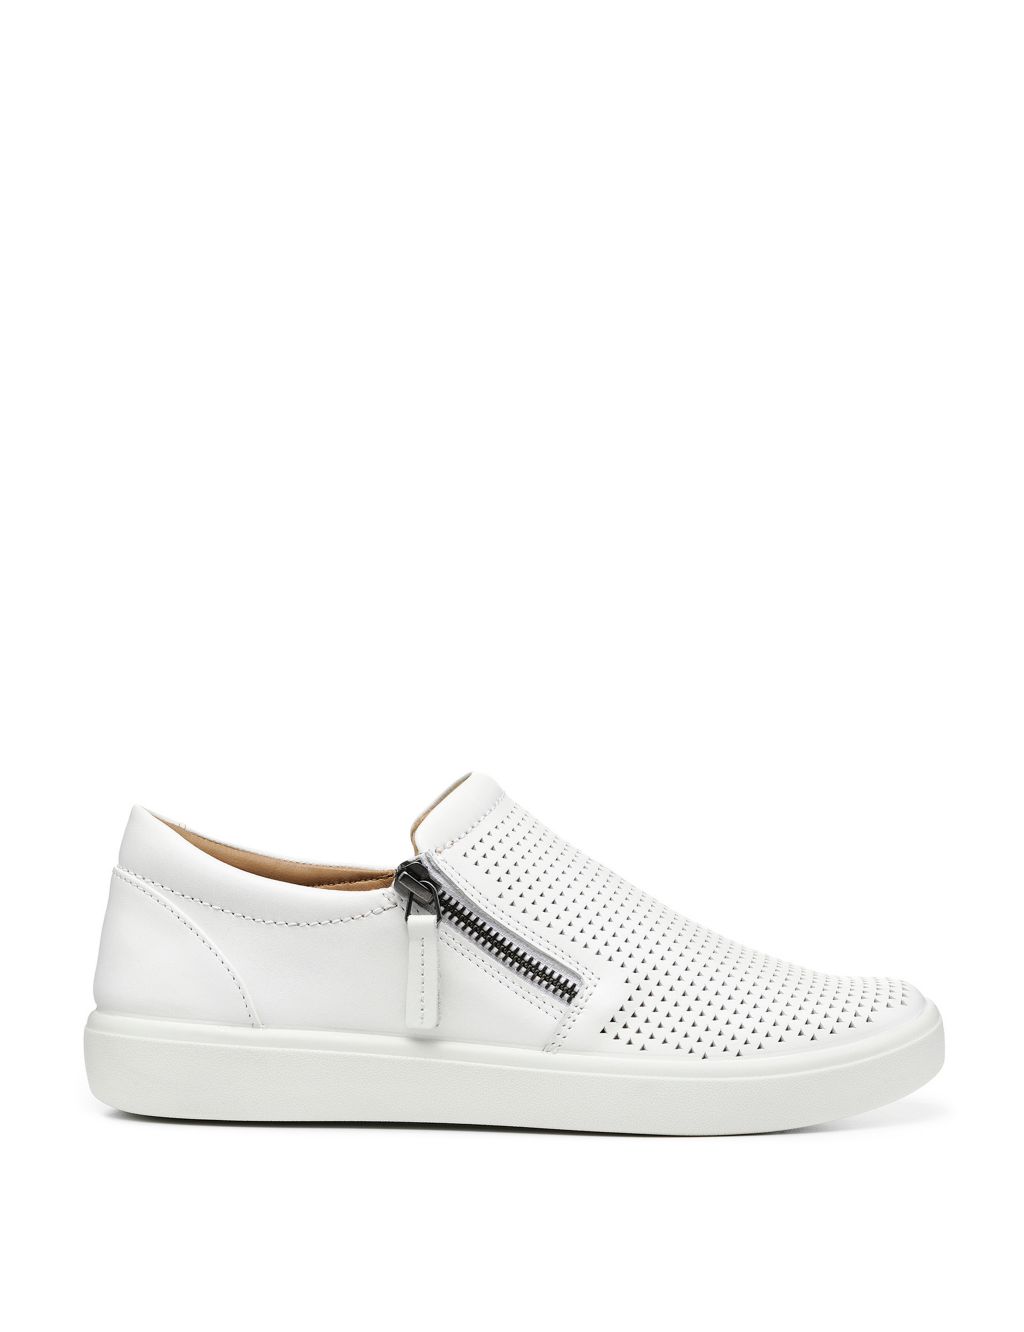 Daisy Wide Fit Leather Flat Boat Shoes image 1